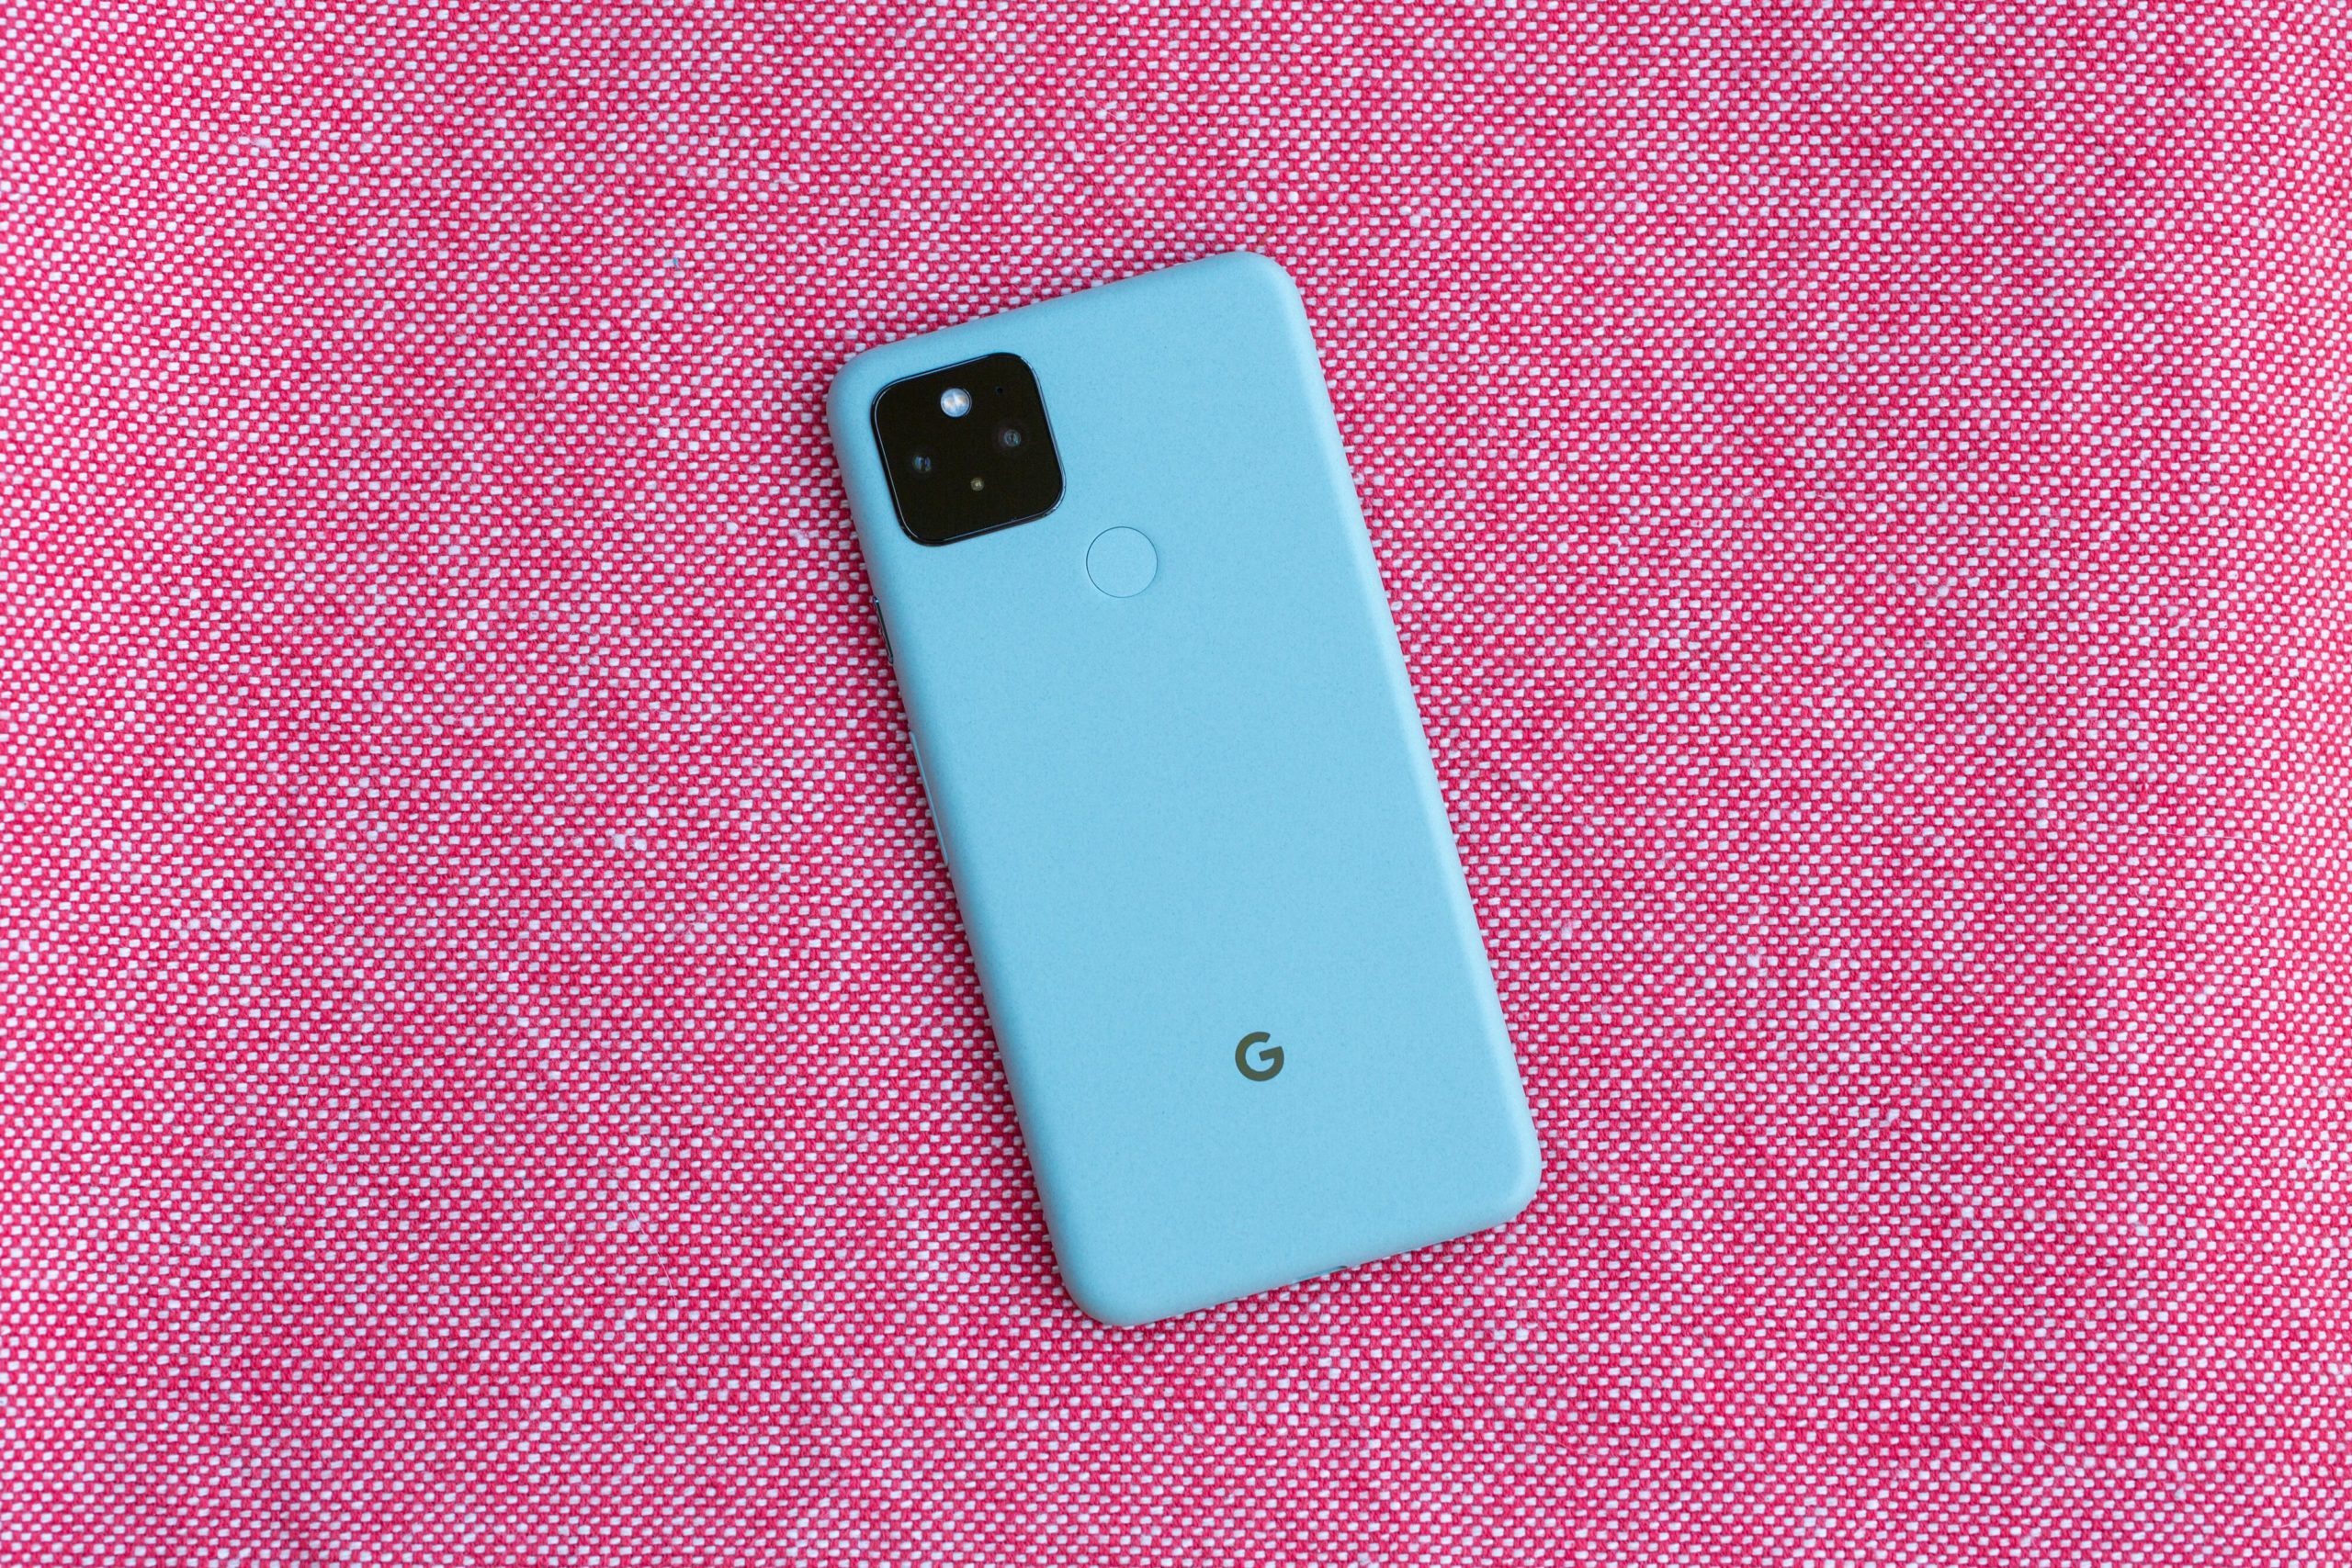 How to Root Google Pixel 5 with Magisk without TWRP